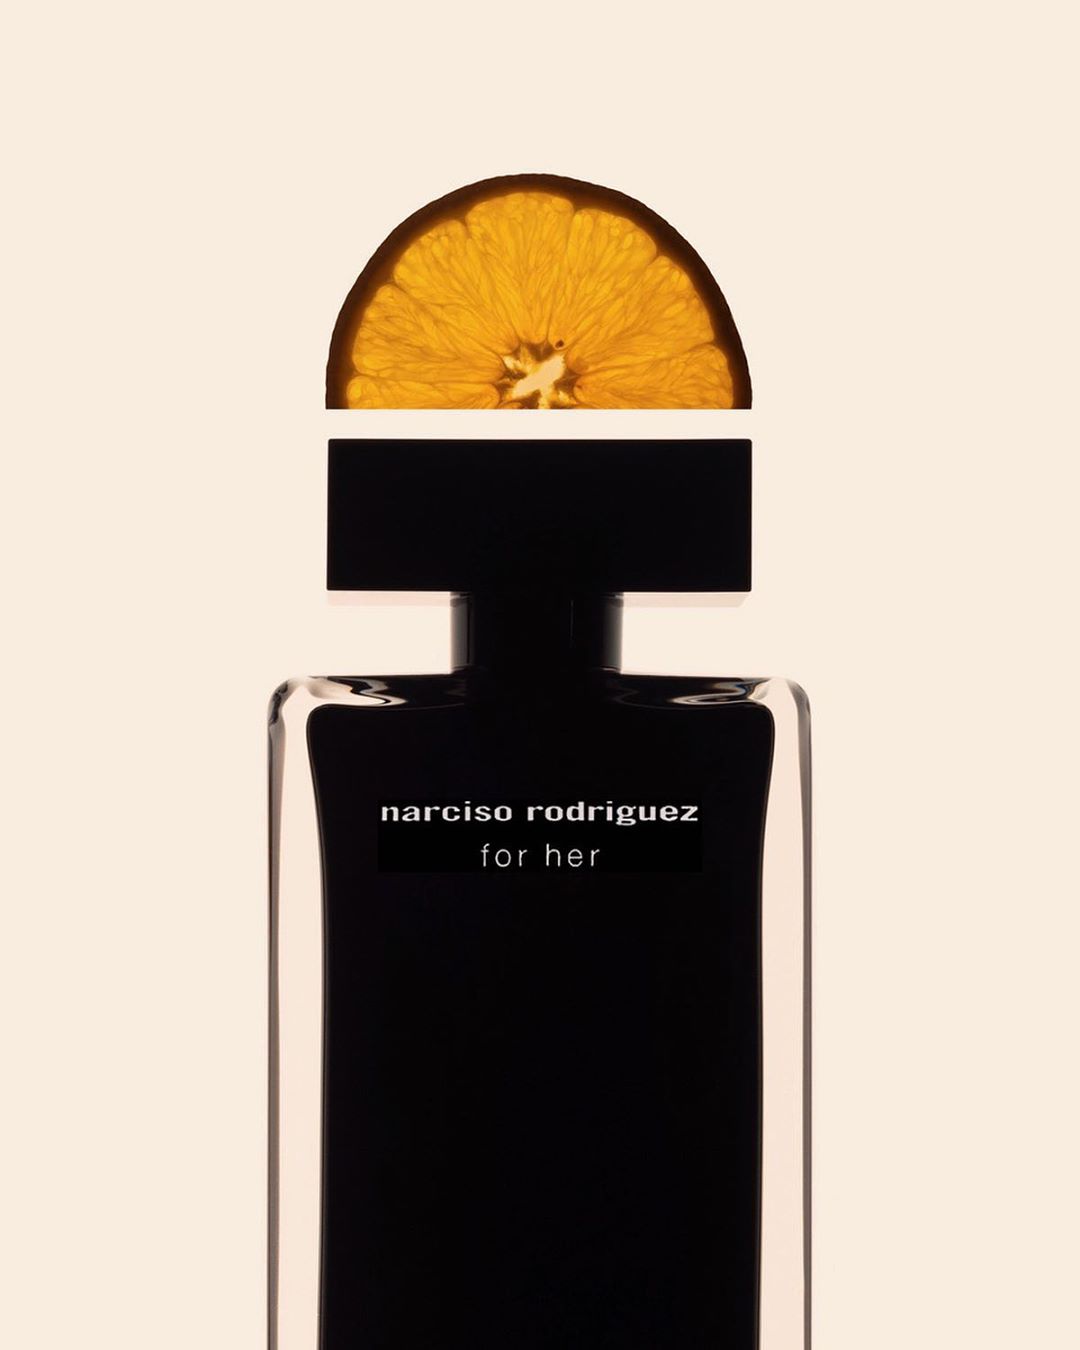 narciso rodriguez - for her: a signature musc with hints of orange blossom is intoxicatingly beautiful.
#forher #narcisorodriguezparfums #parfum #fragrance